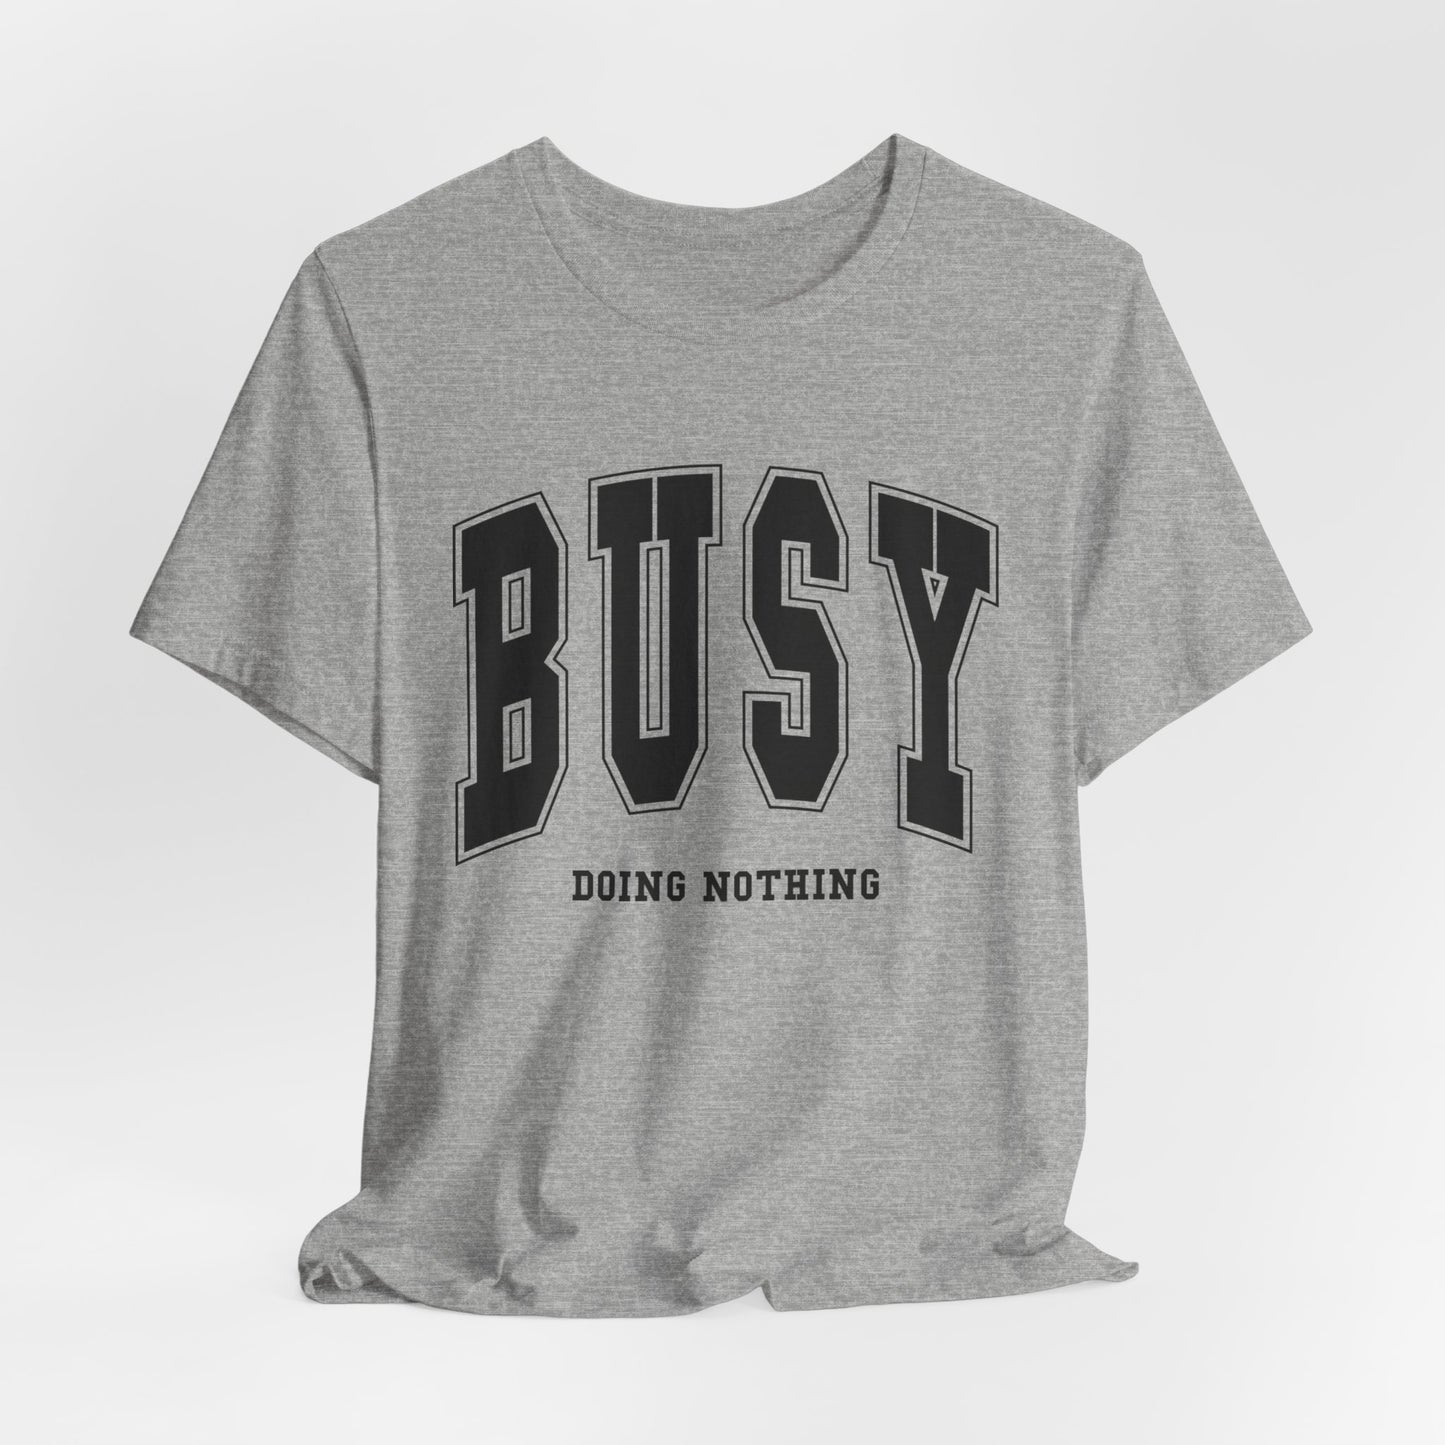 Busy Doing Nothing Funny Adult Unisex Short Sleeve Tee